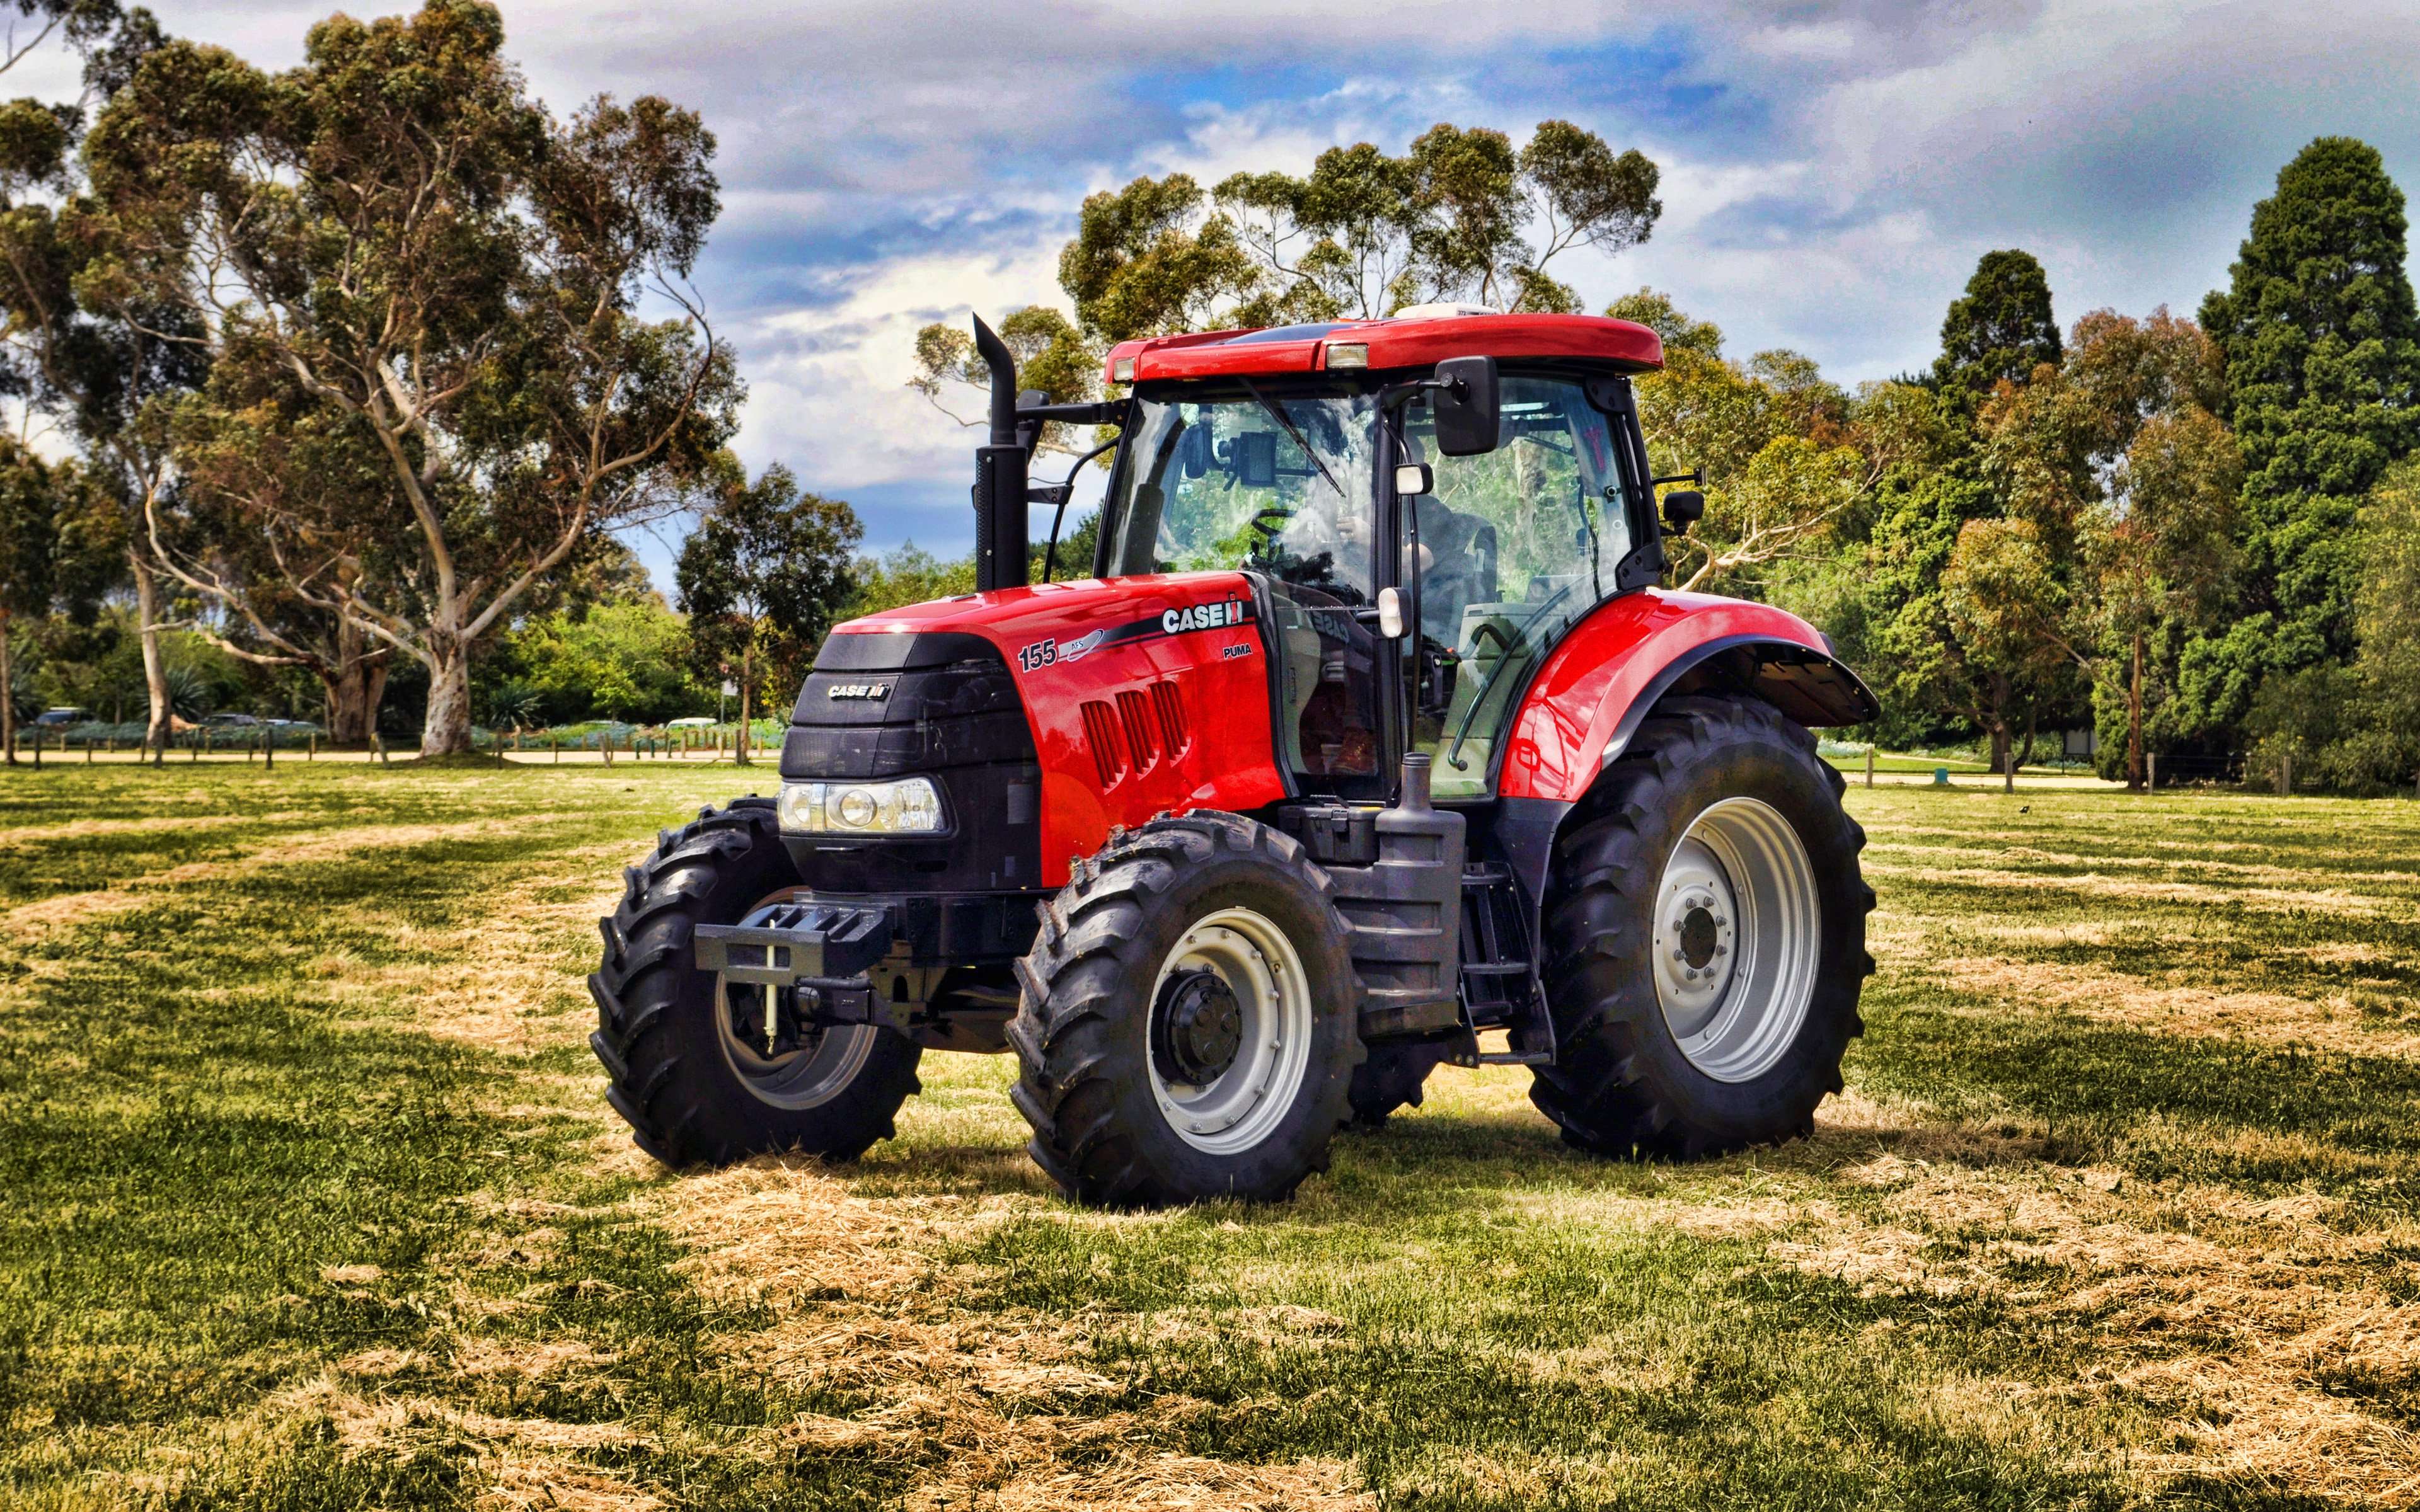 Download wallpaper Case IH Puma 4k, HDR, 2019 tractors, agricultural machinery, red tractor, agriculture, Case for desktop with resolution 3840x2400. High Quality HD picture wallpaper